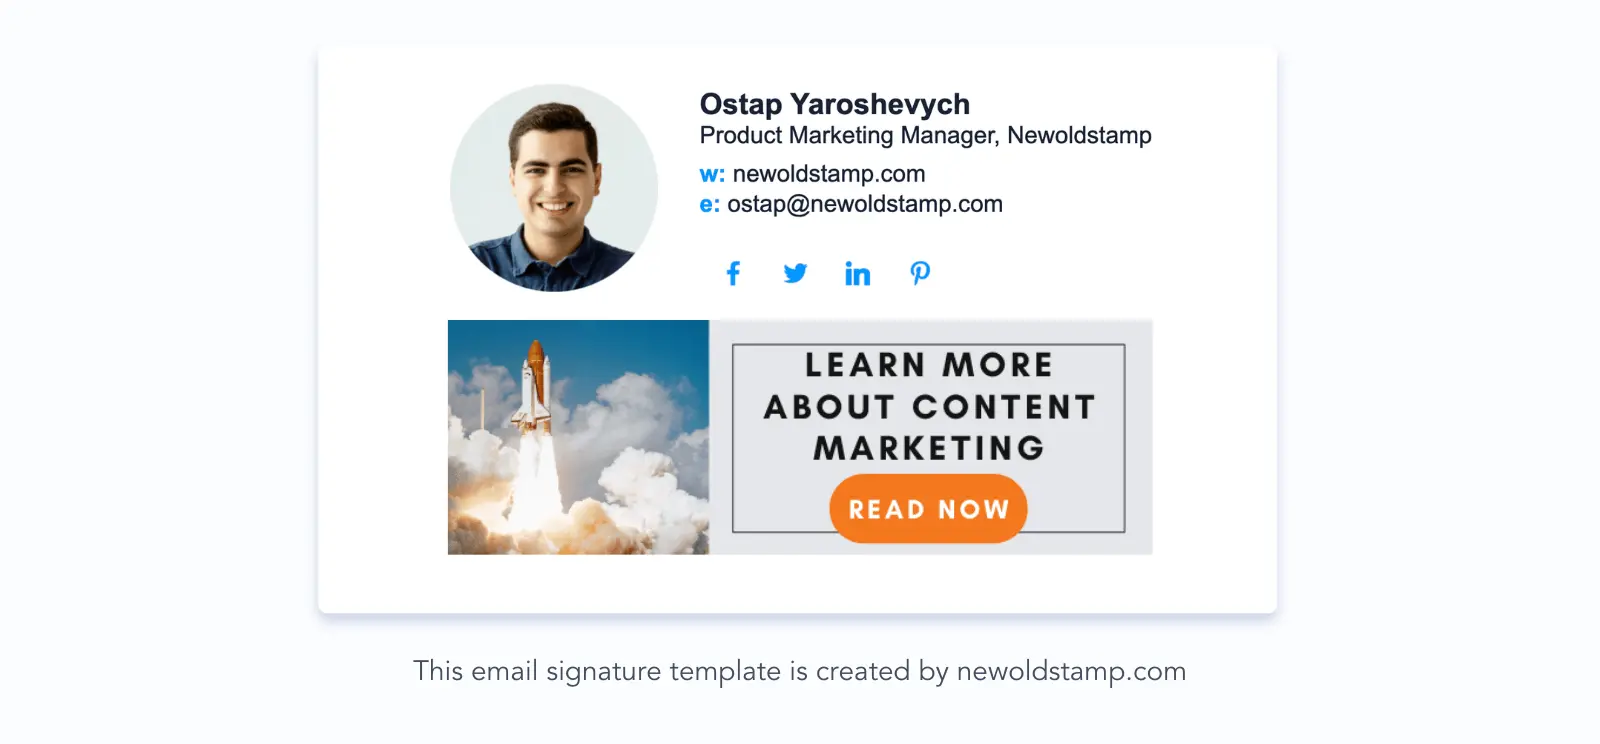 Email signature that drives traffic